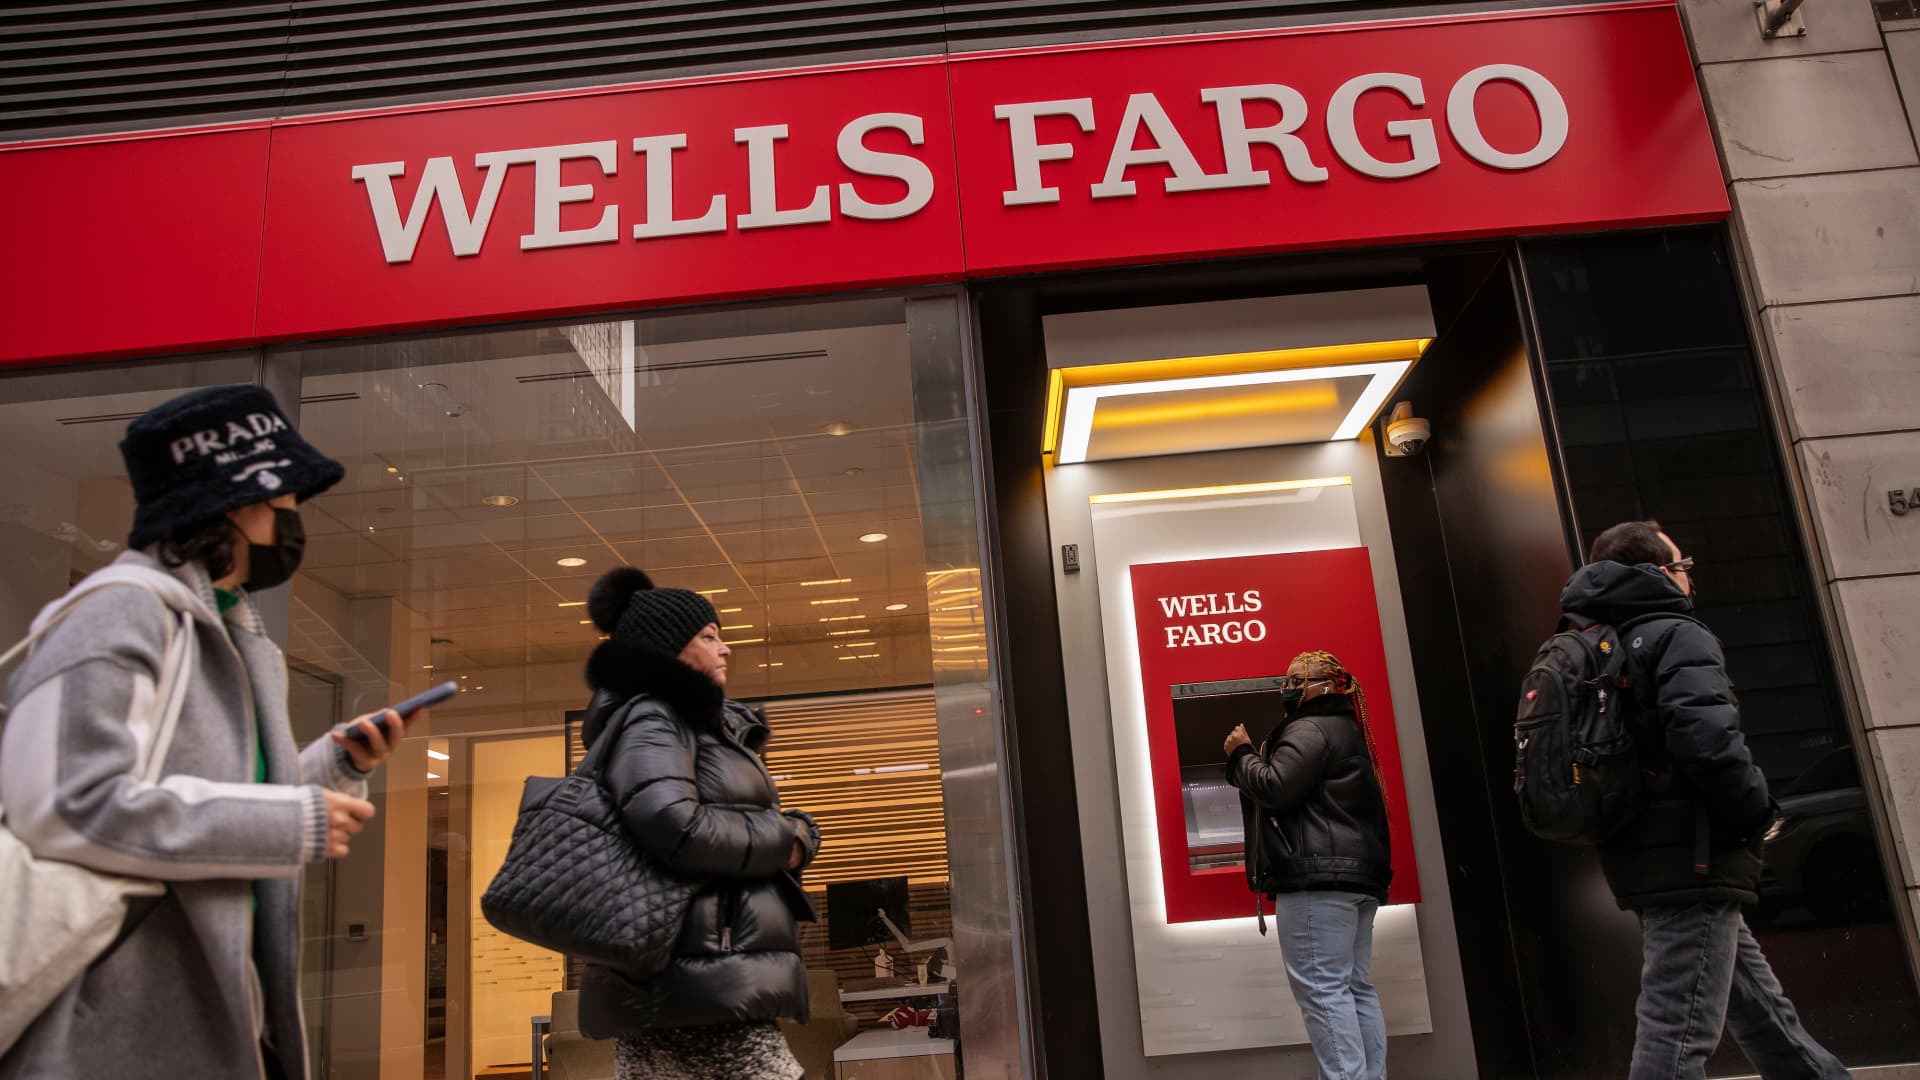 Wells Fargo gets a strong buy recommendation for many of the same reasons we own the stock